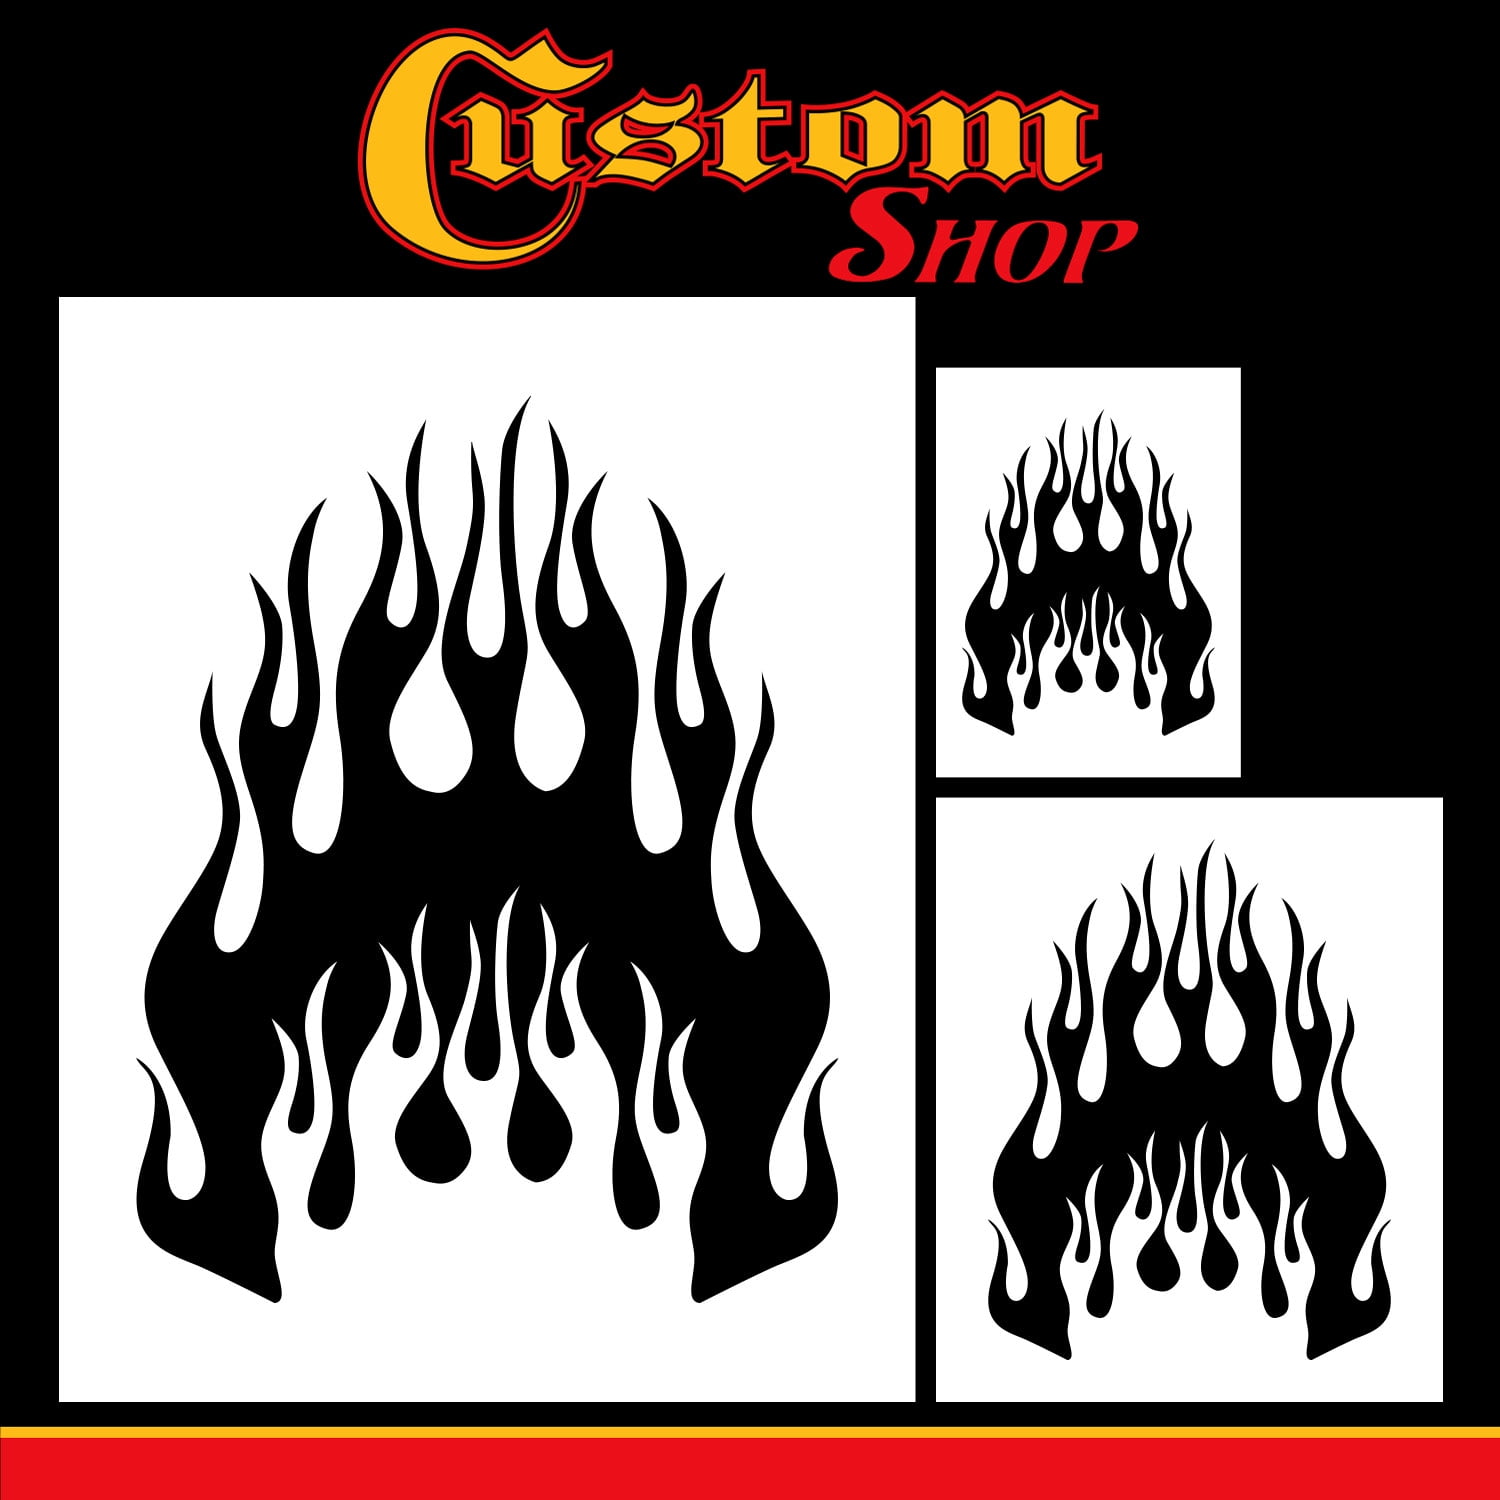 Airbrush Skull Fire Flame Stencil Set (Skull Design #1 in 3 Scale Sizes) -  Laser Cut Reusable Templates - Auto 